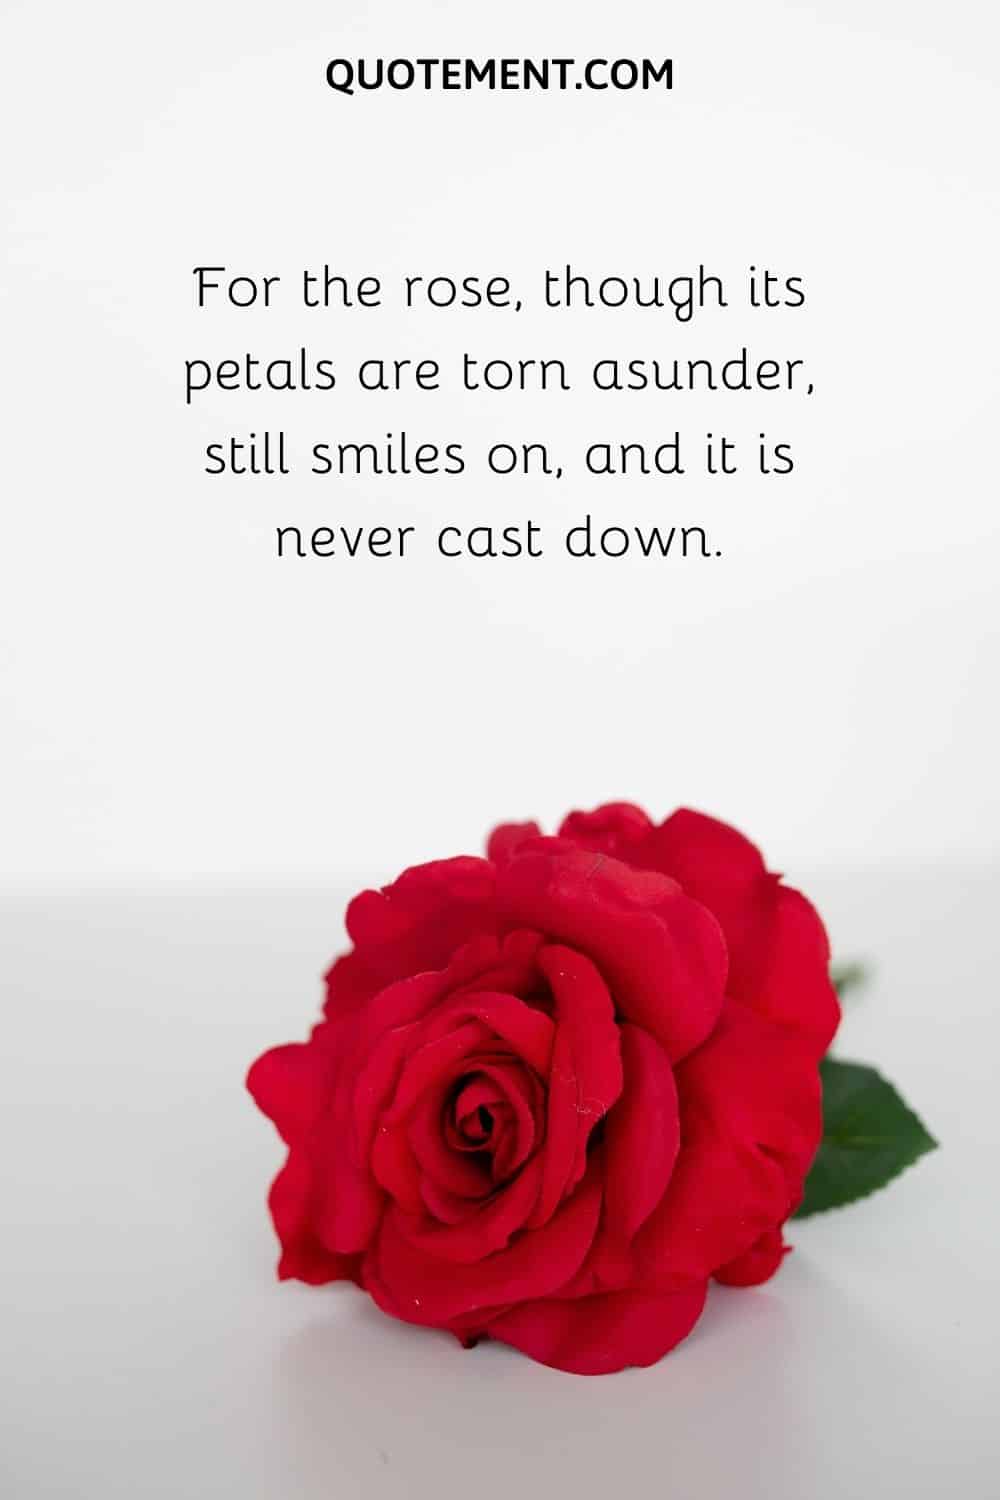 For the rose, though its petals are torn asunder, still smiles on, and it is never cast down.